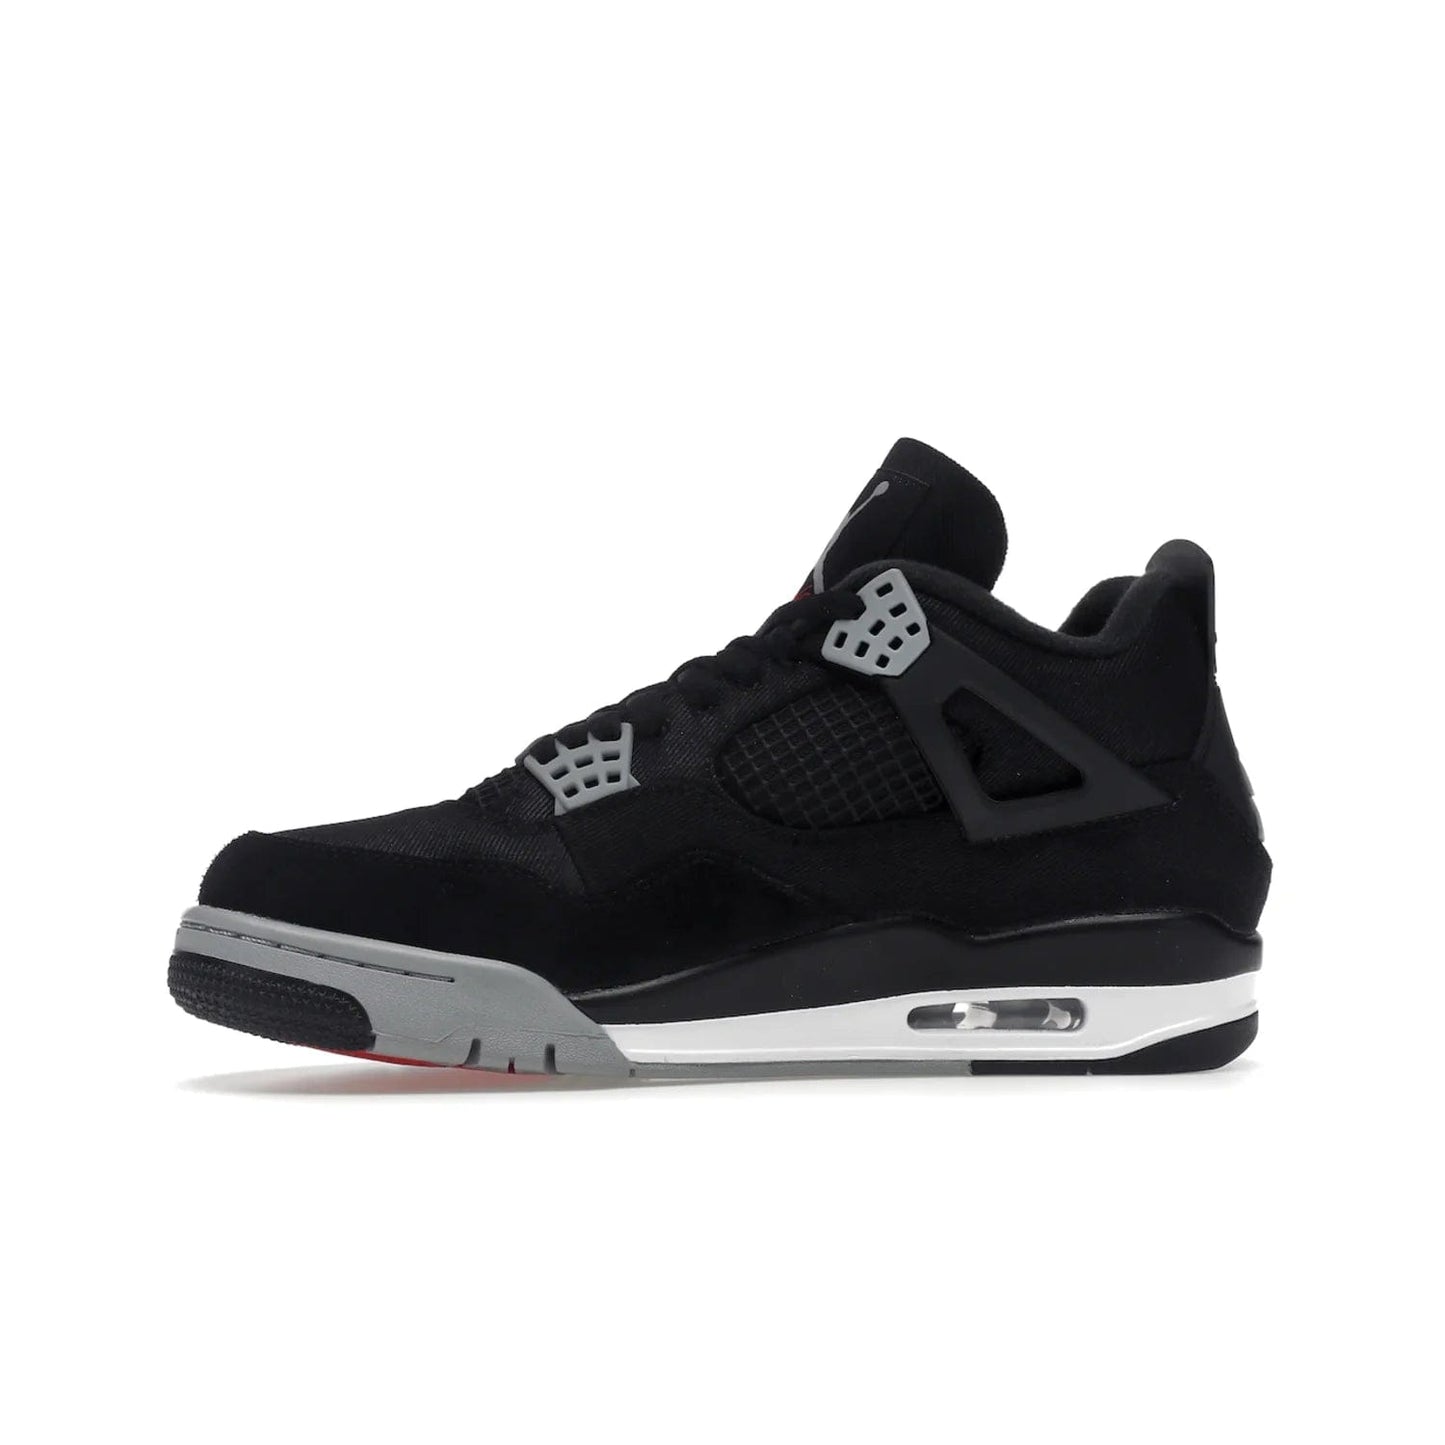 Jordan 4 Retro SE Black Canvas - Image 18 - Only at www.BallersClubKickz.com - The Air Jordan 4 Retro SE Black Canvas brings timeless style and modern luxury. Classic mid-top sneaker in black canvas and grey suede with tonal Jumpman logo, Flight logo and polyurethane midsole with visible Air-sole cushioning. Refresh your sneaker collection and rock the Air Jordan 4 Retro SE Black Canvas.